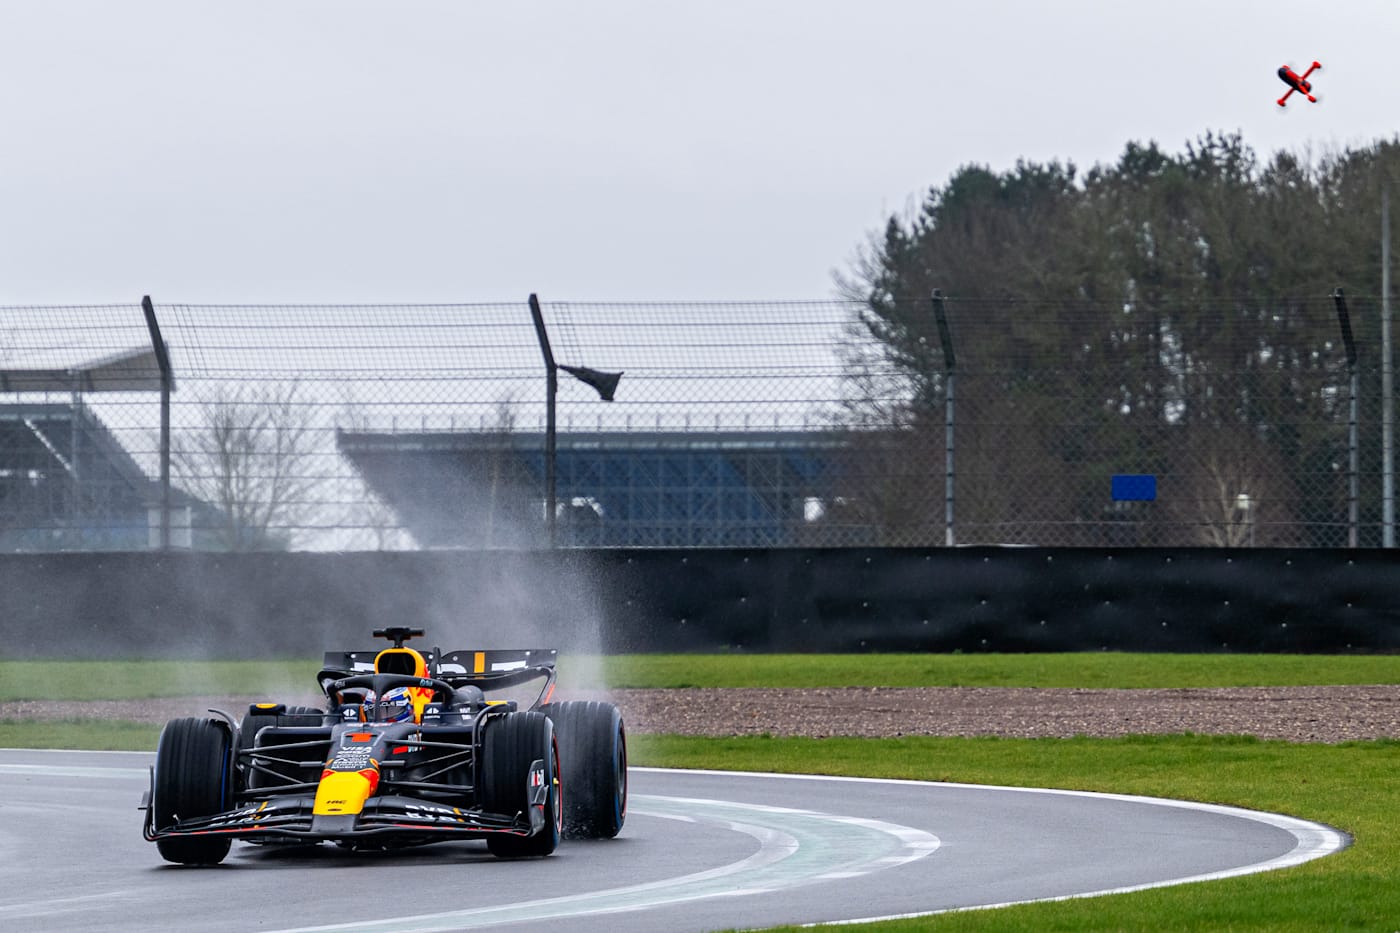 The drone keeps pace for an entire lap – a first not only in drone tech, but in F1 history.